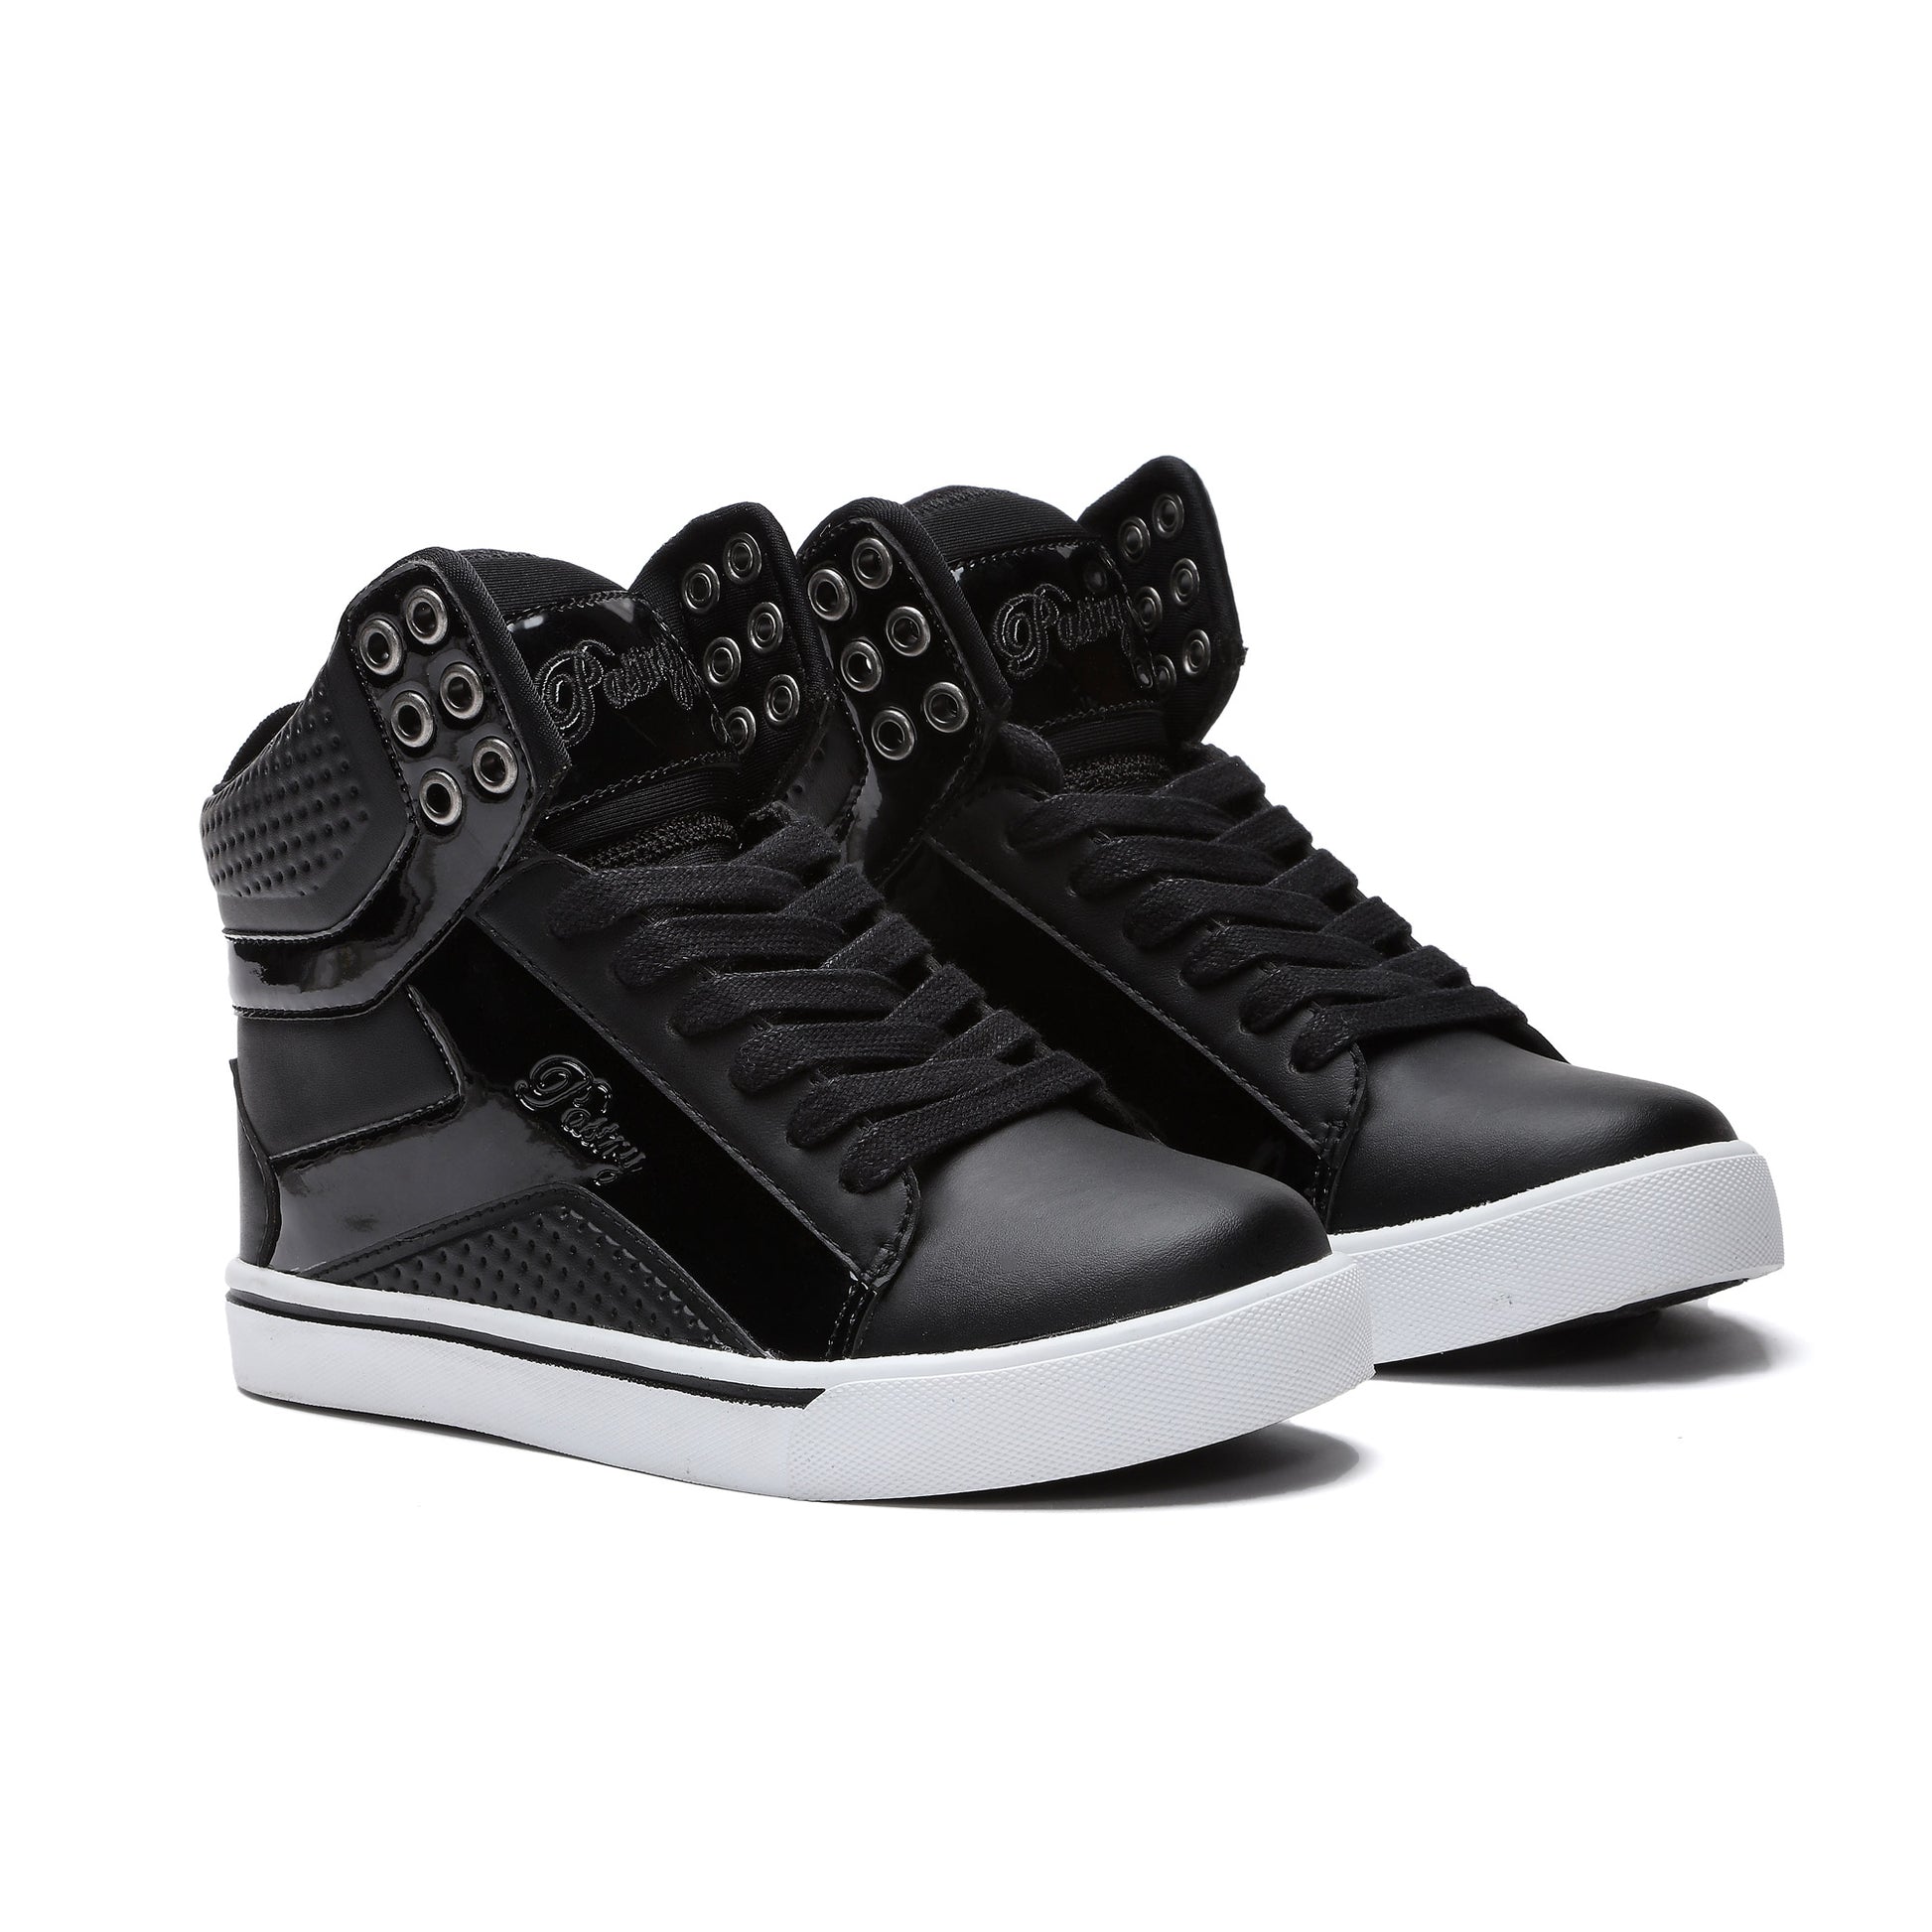 Pair of Pastry Pop Tart 2.0 Youth Sneaker in Black/White in 3 quarter view